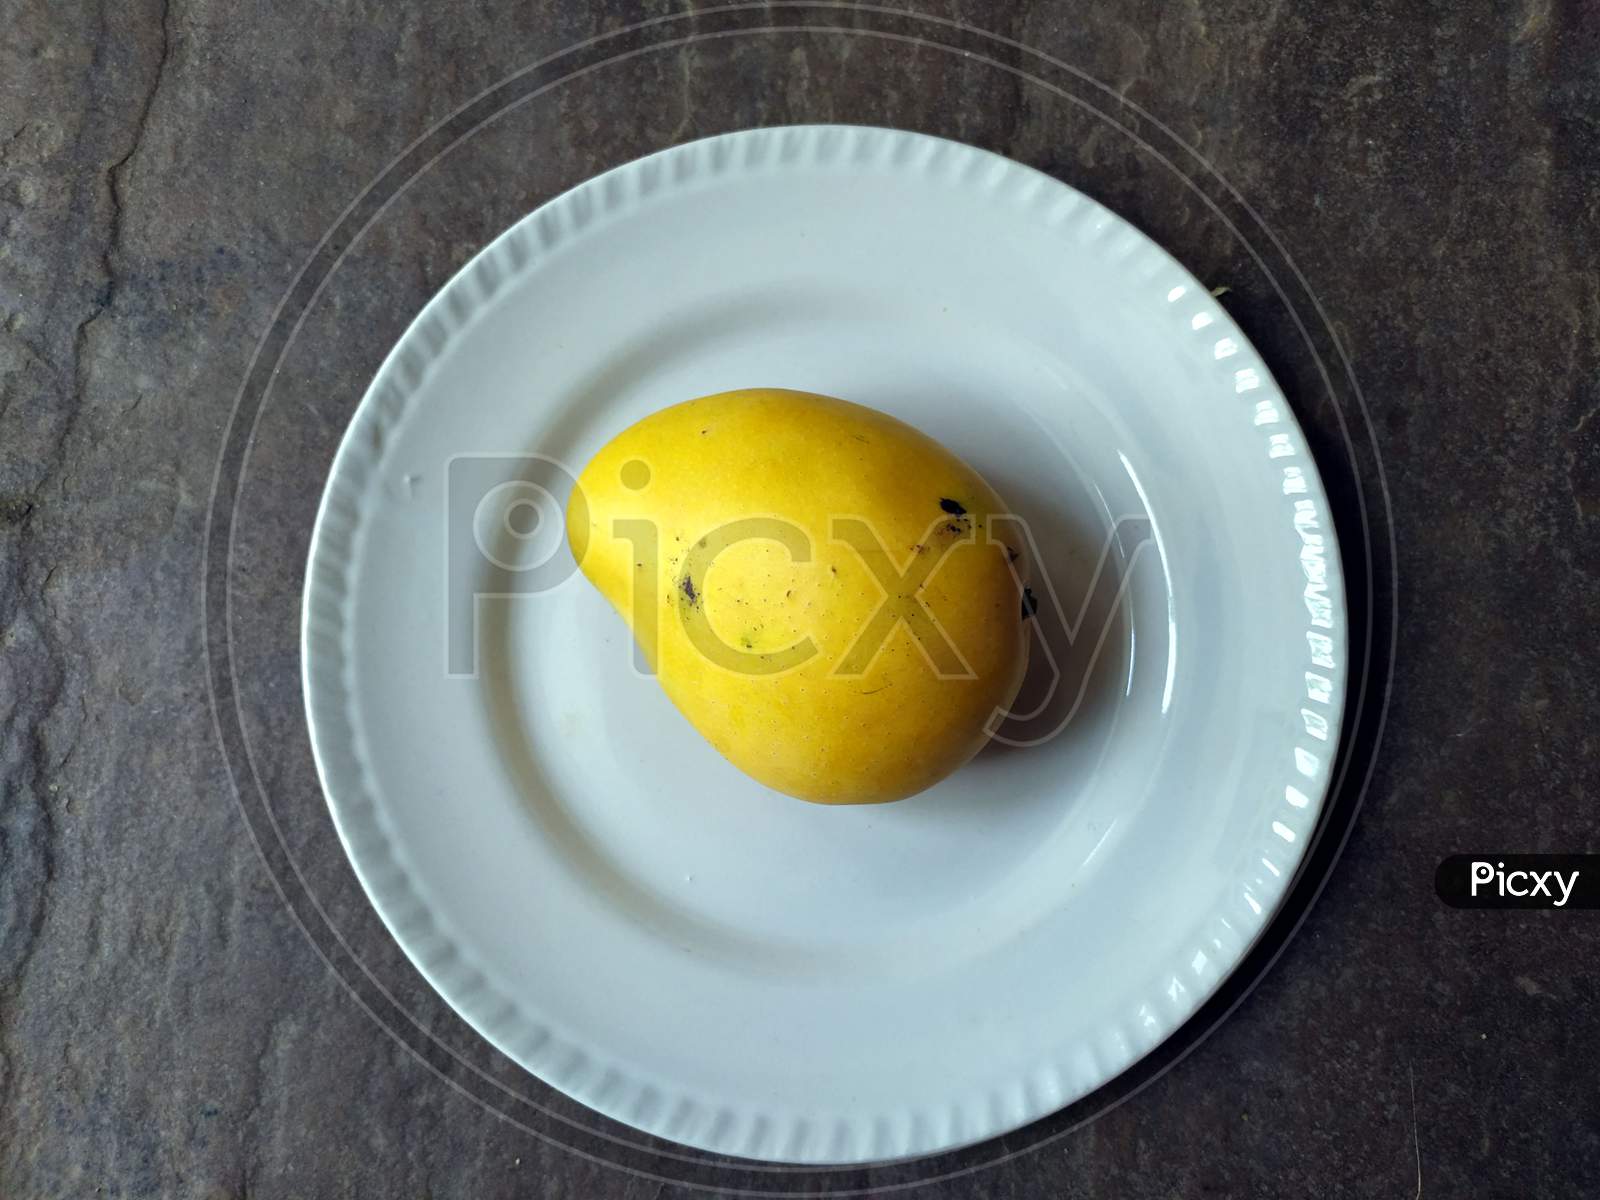 fresh sweet yellow mango put in a white plate on stone background